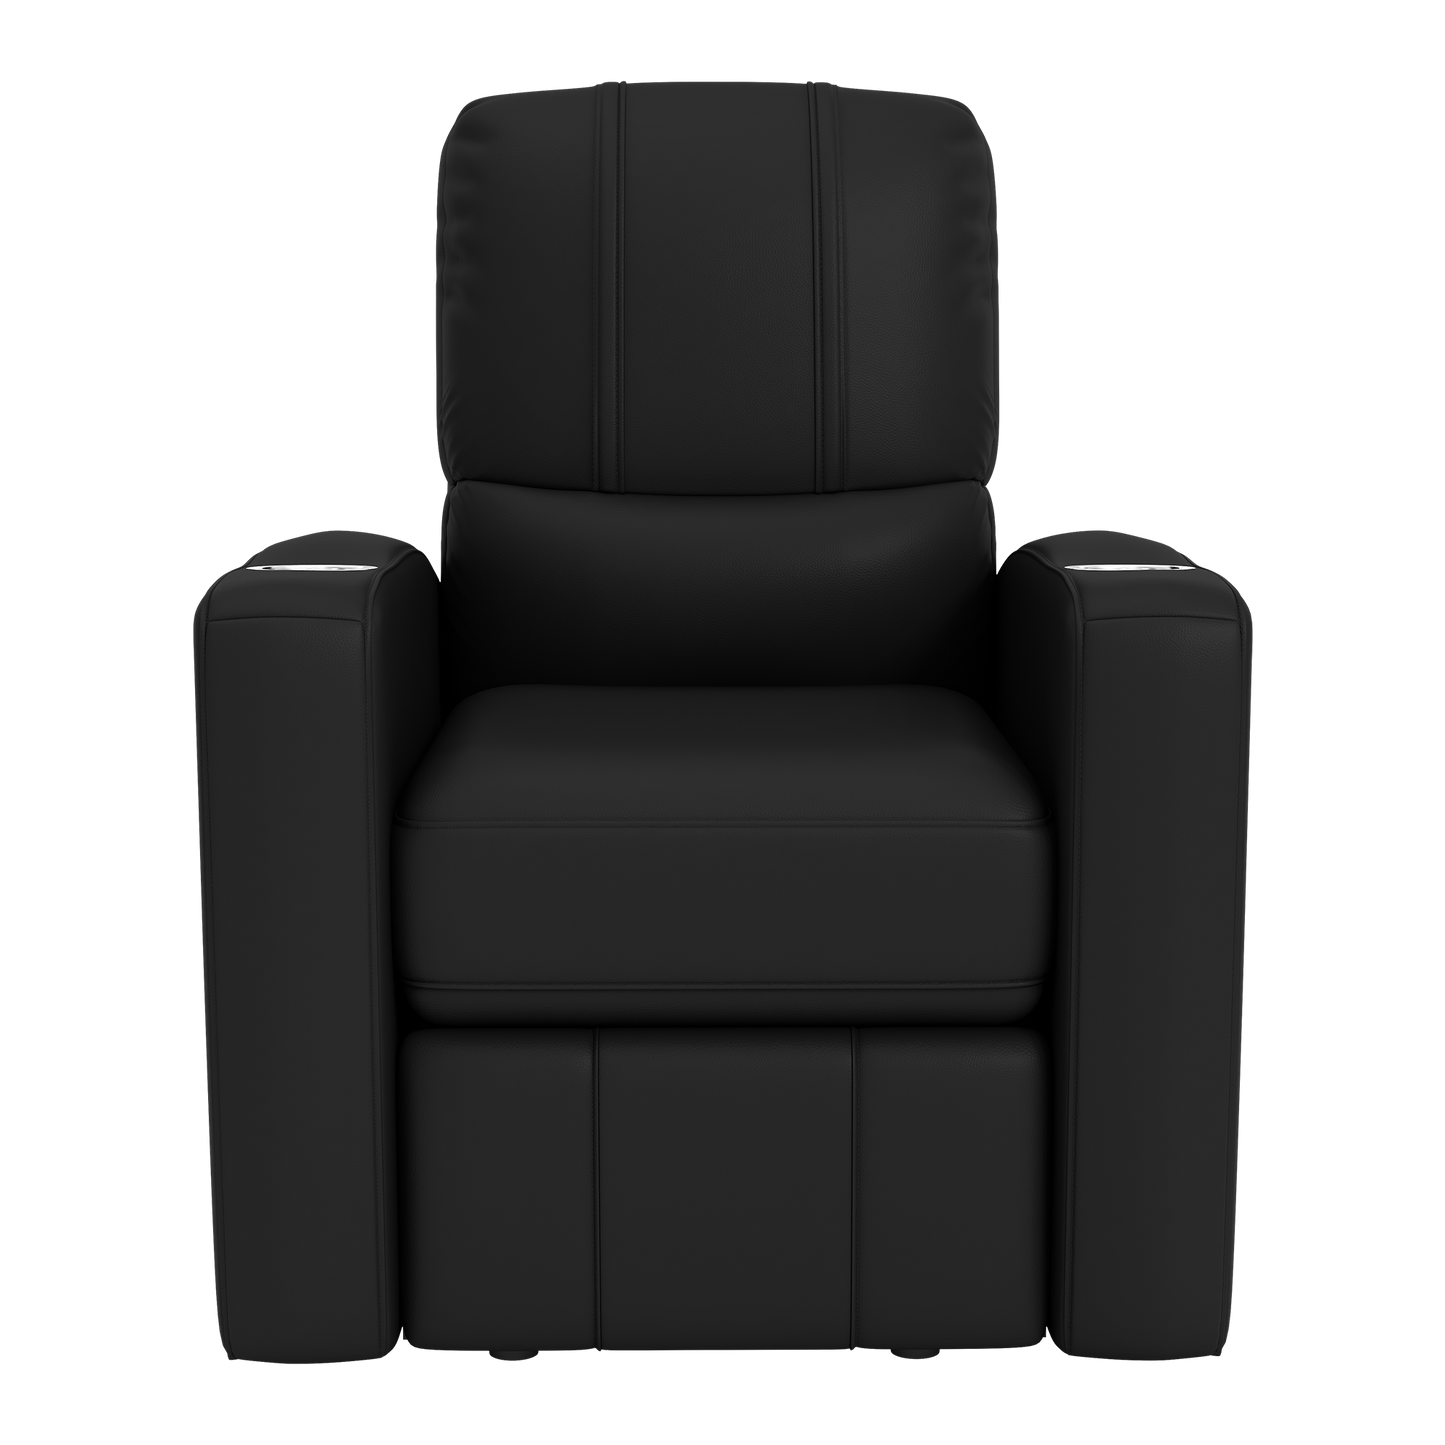 Stealth Recliner with San Jose Earthquakes Alternate Logo